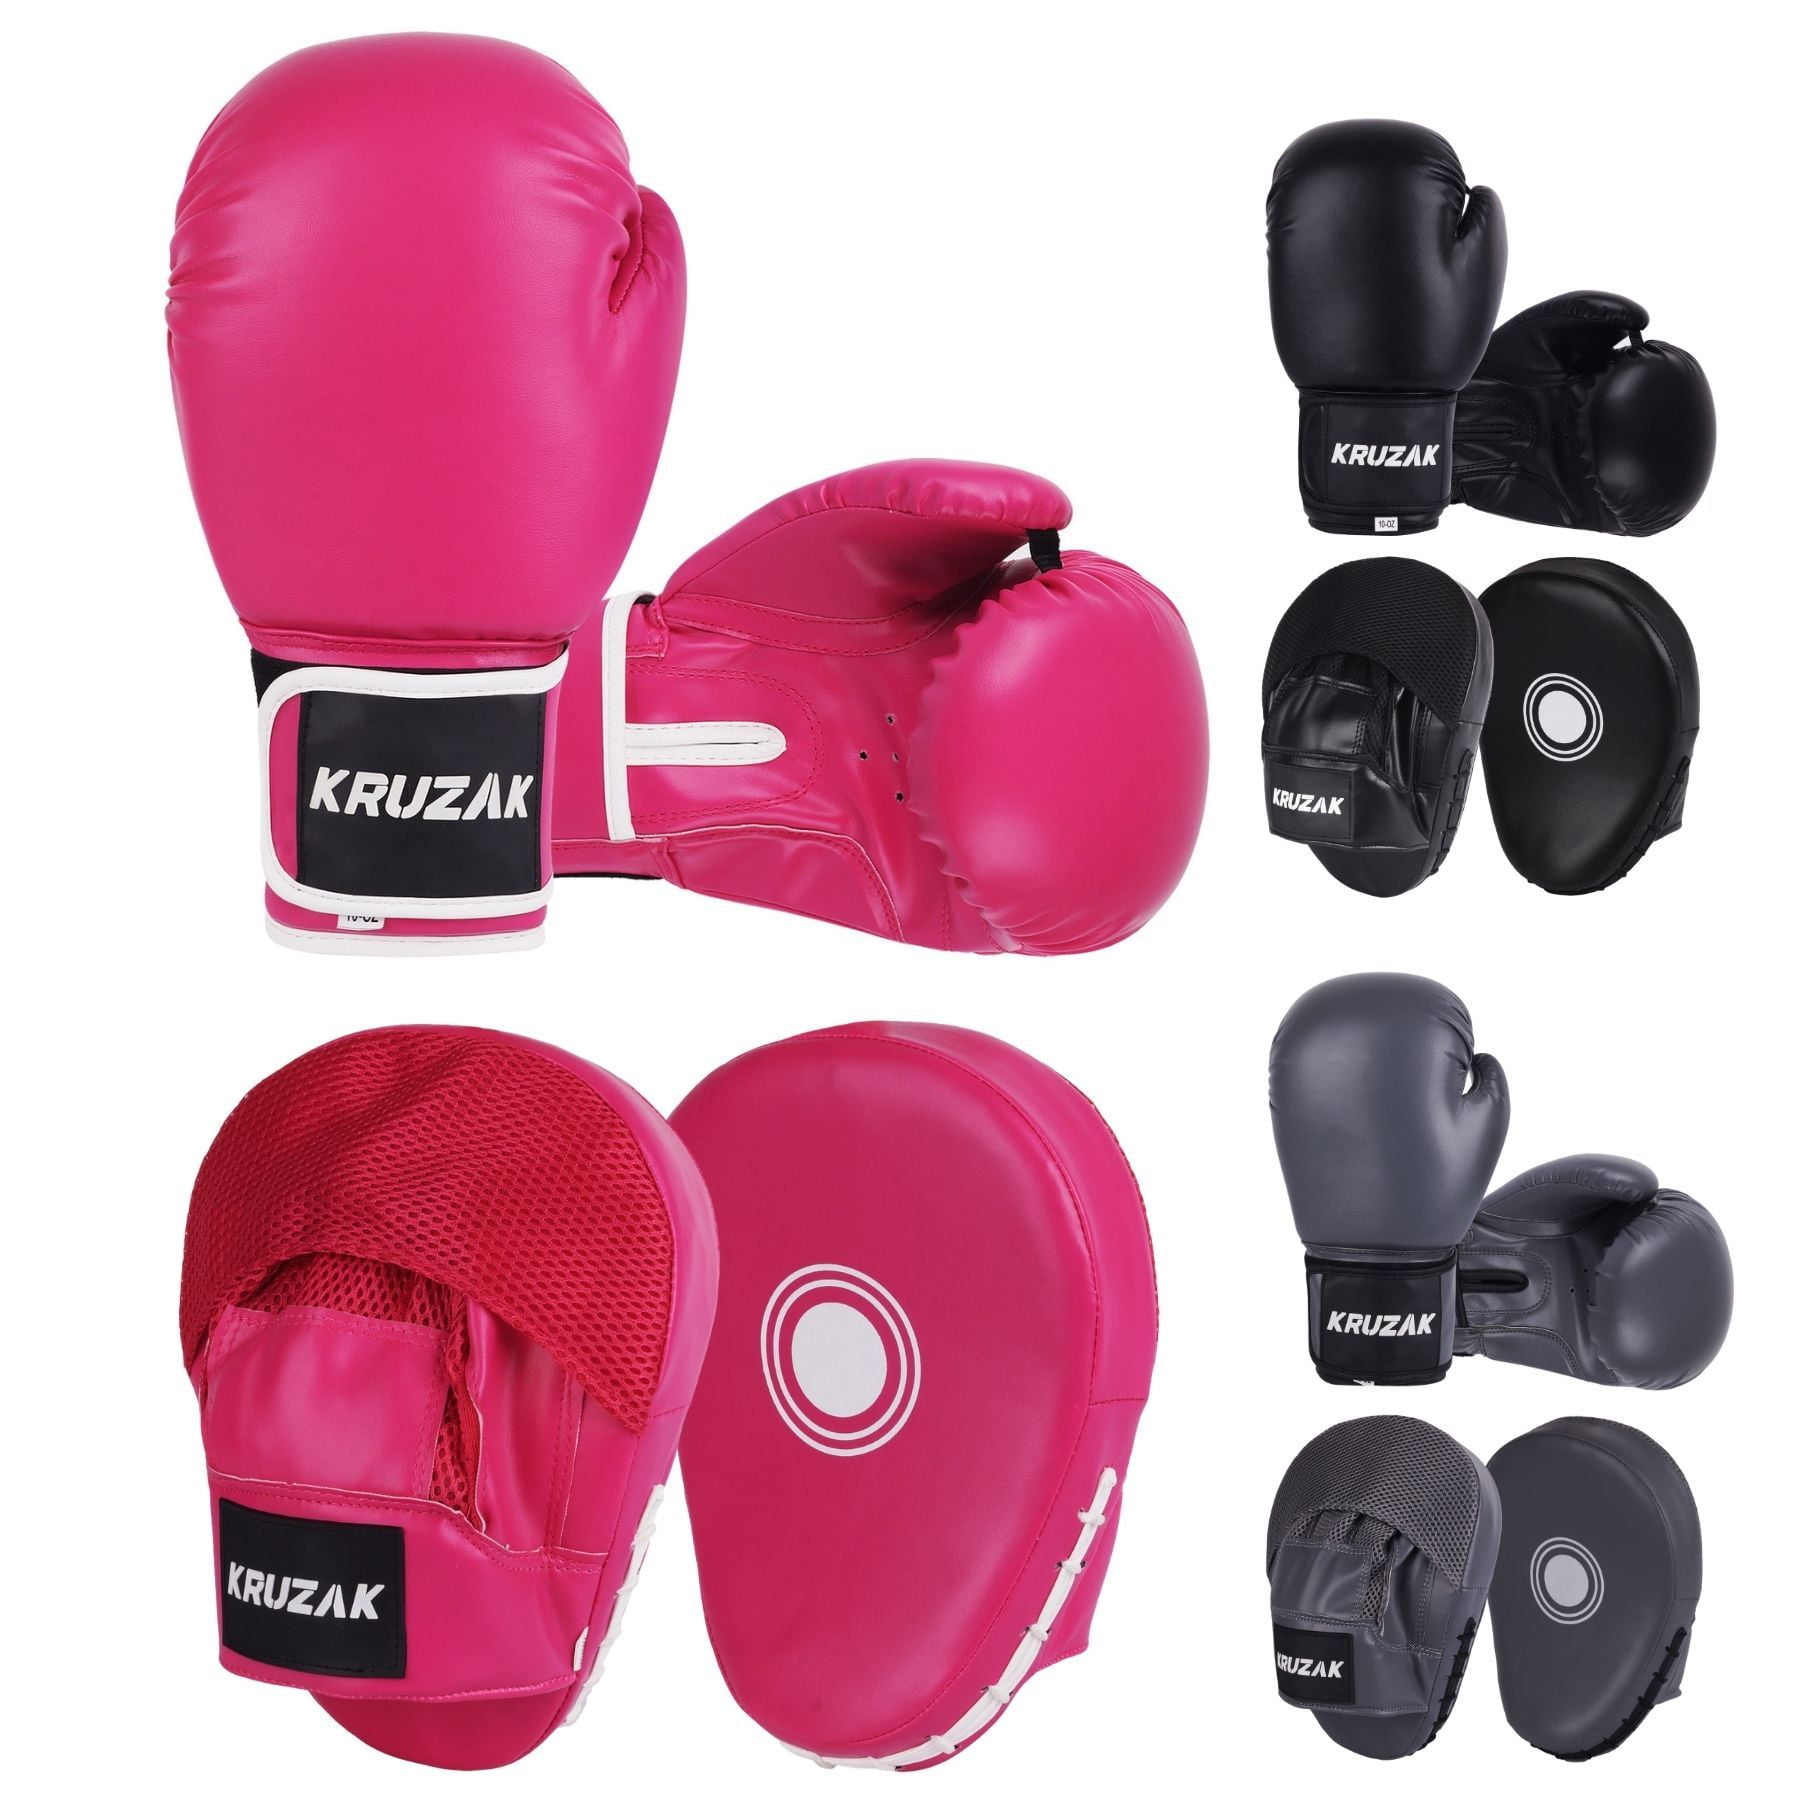 Focus Pads and Boxing Gloves Hand Wraps Set Punching Kickboxing Fighting Mitts 